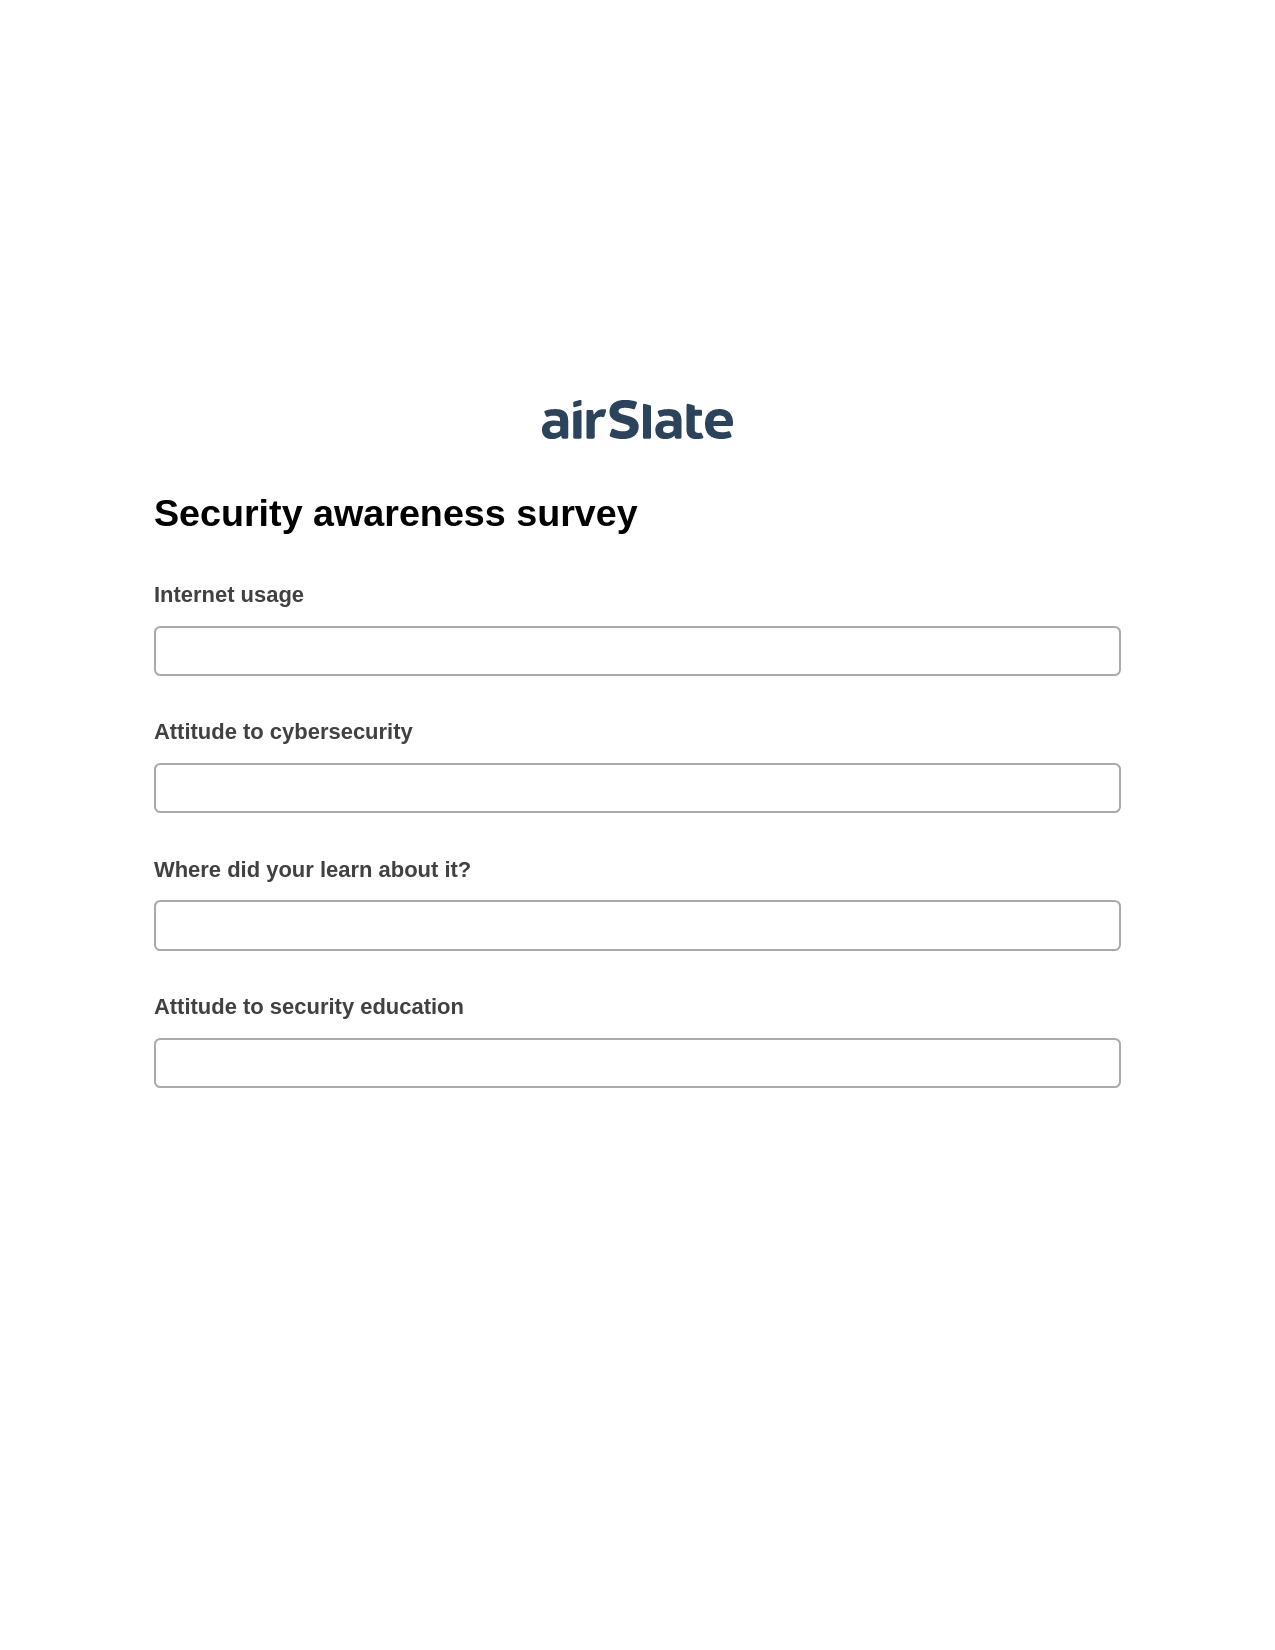 Security awareness survey Pre-fill from Google Sheets Bot, Revoke Access Bot, Export to Excel 365 Bot